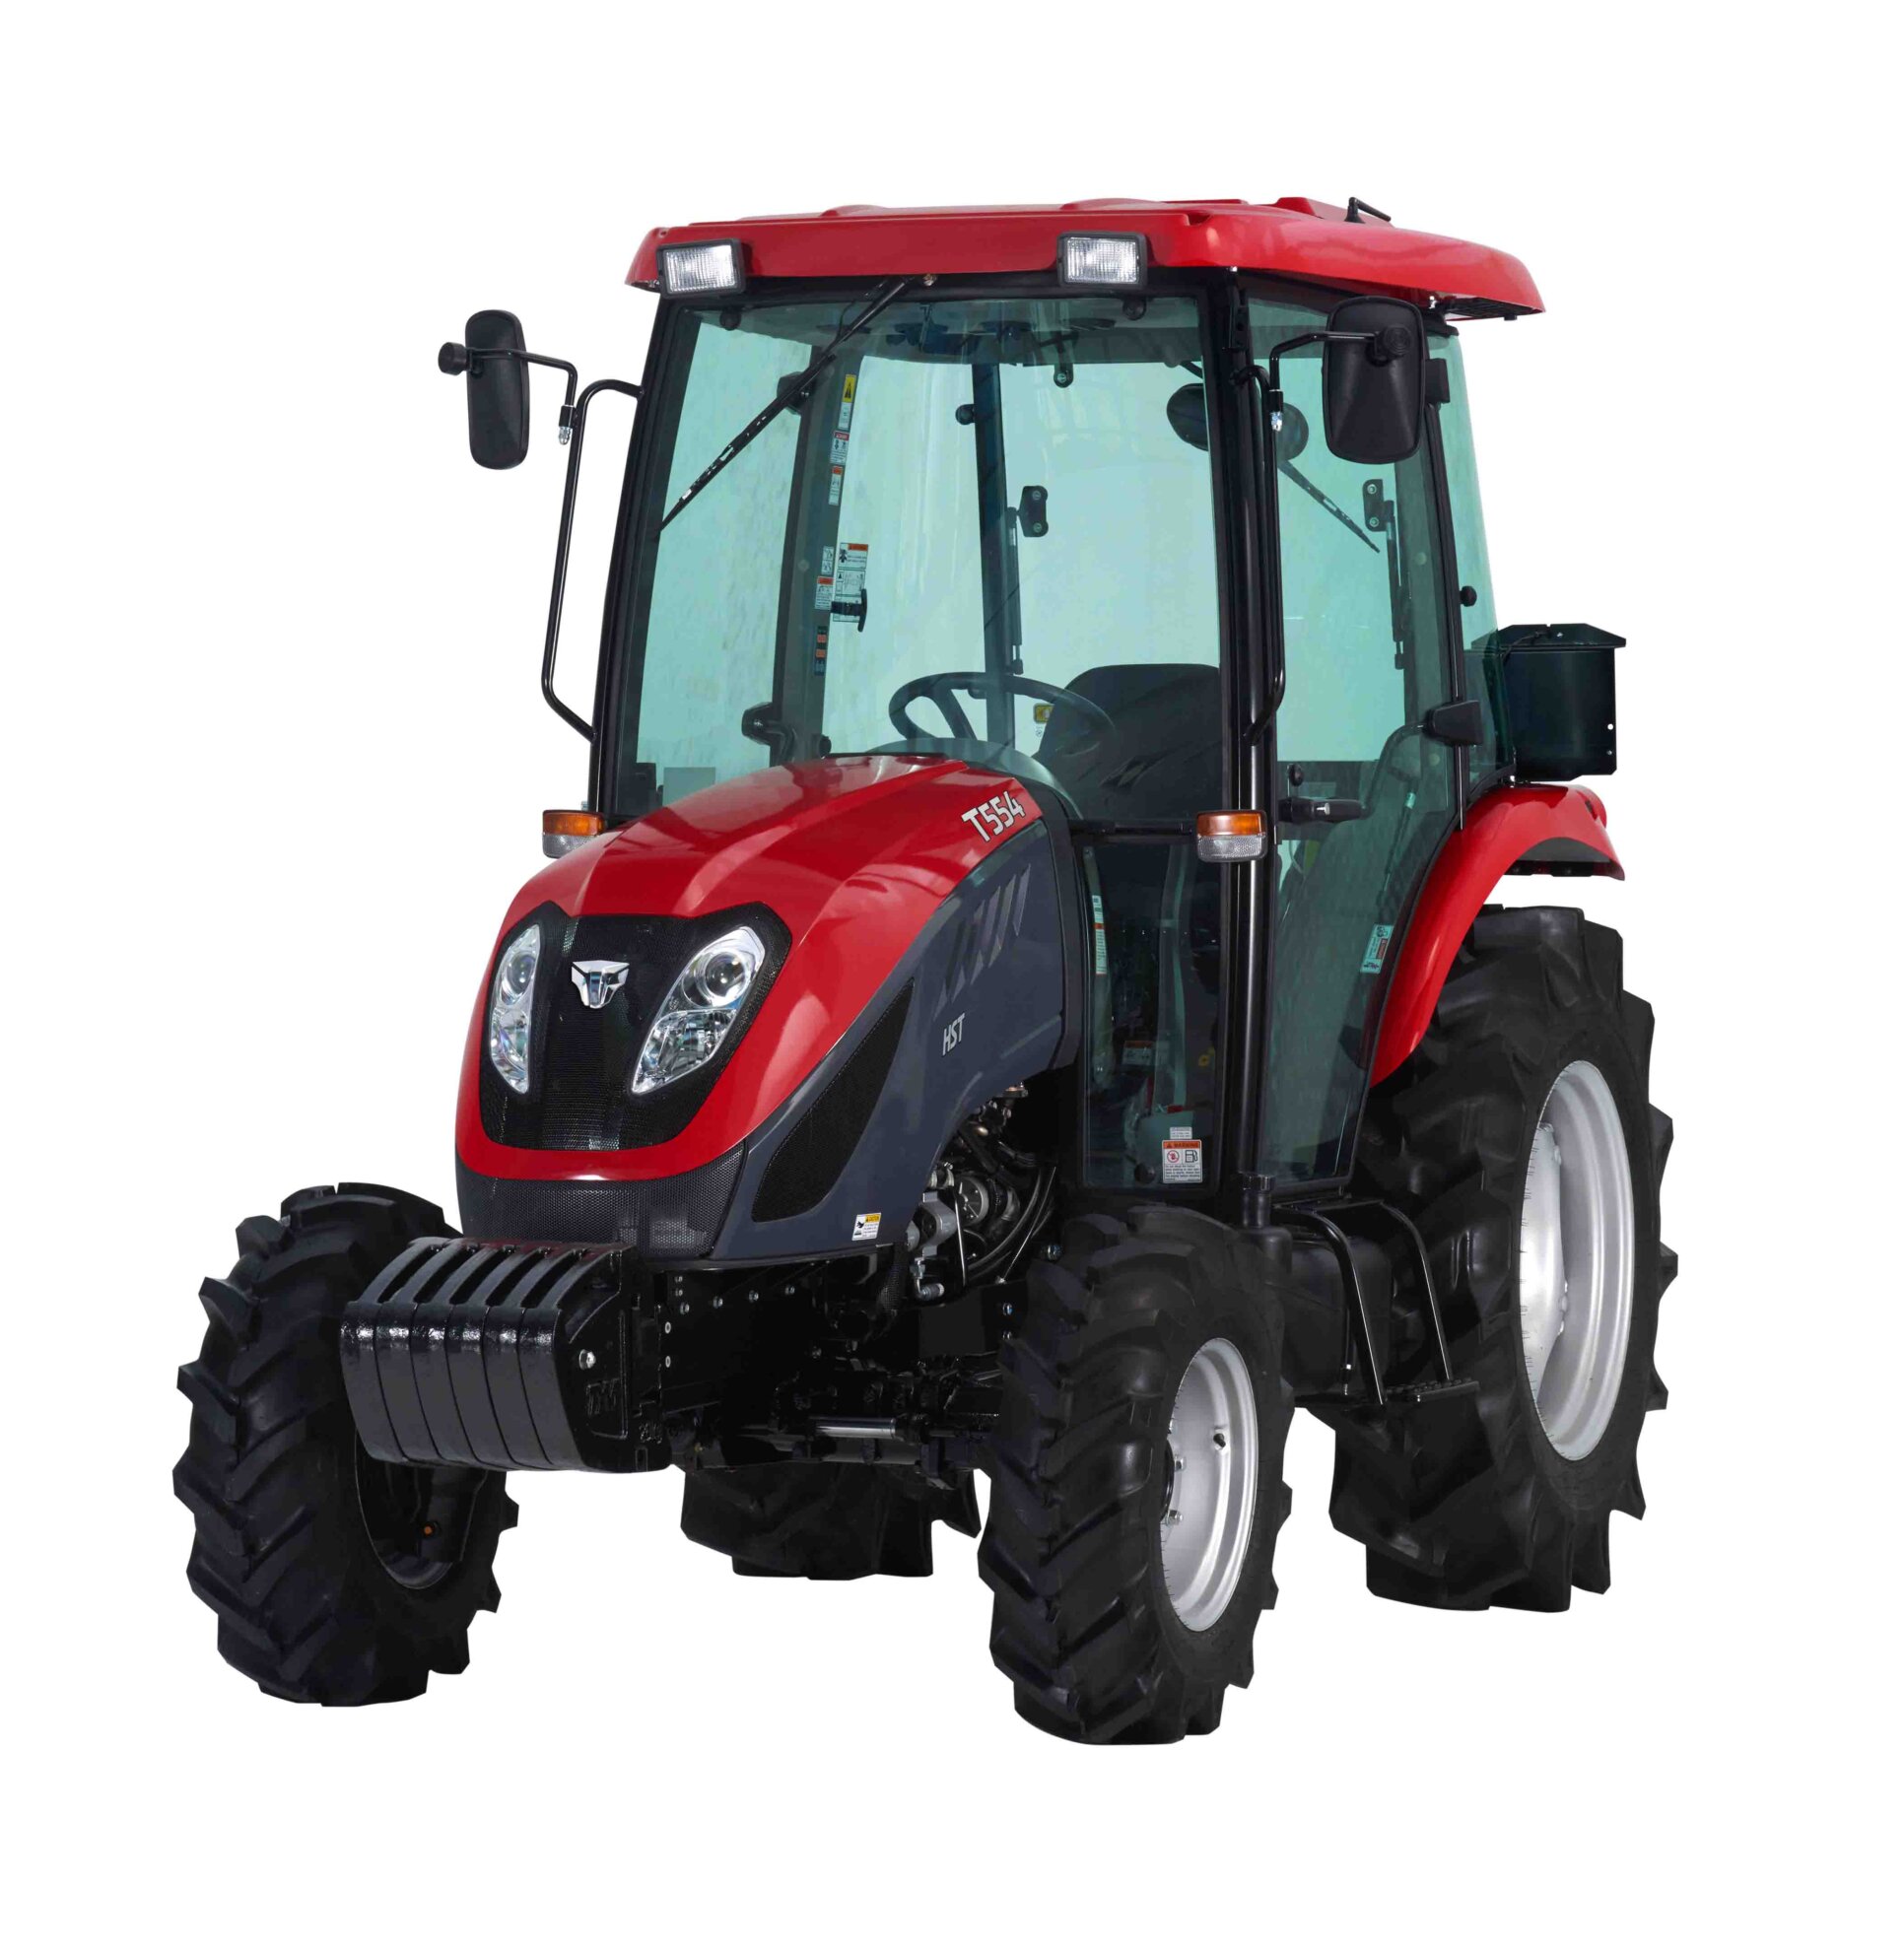 Tym/Branson compact tractor model T555 Cab. (Gear drive)